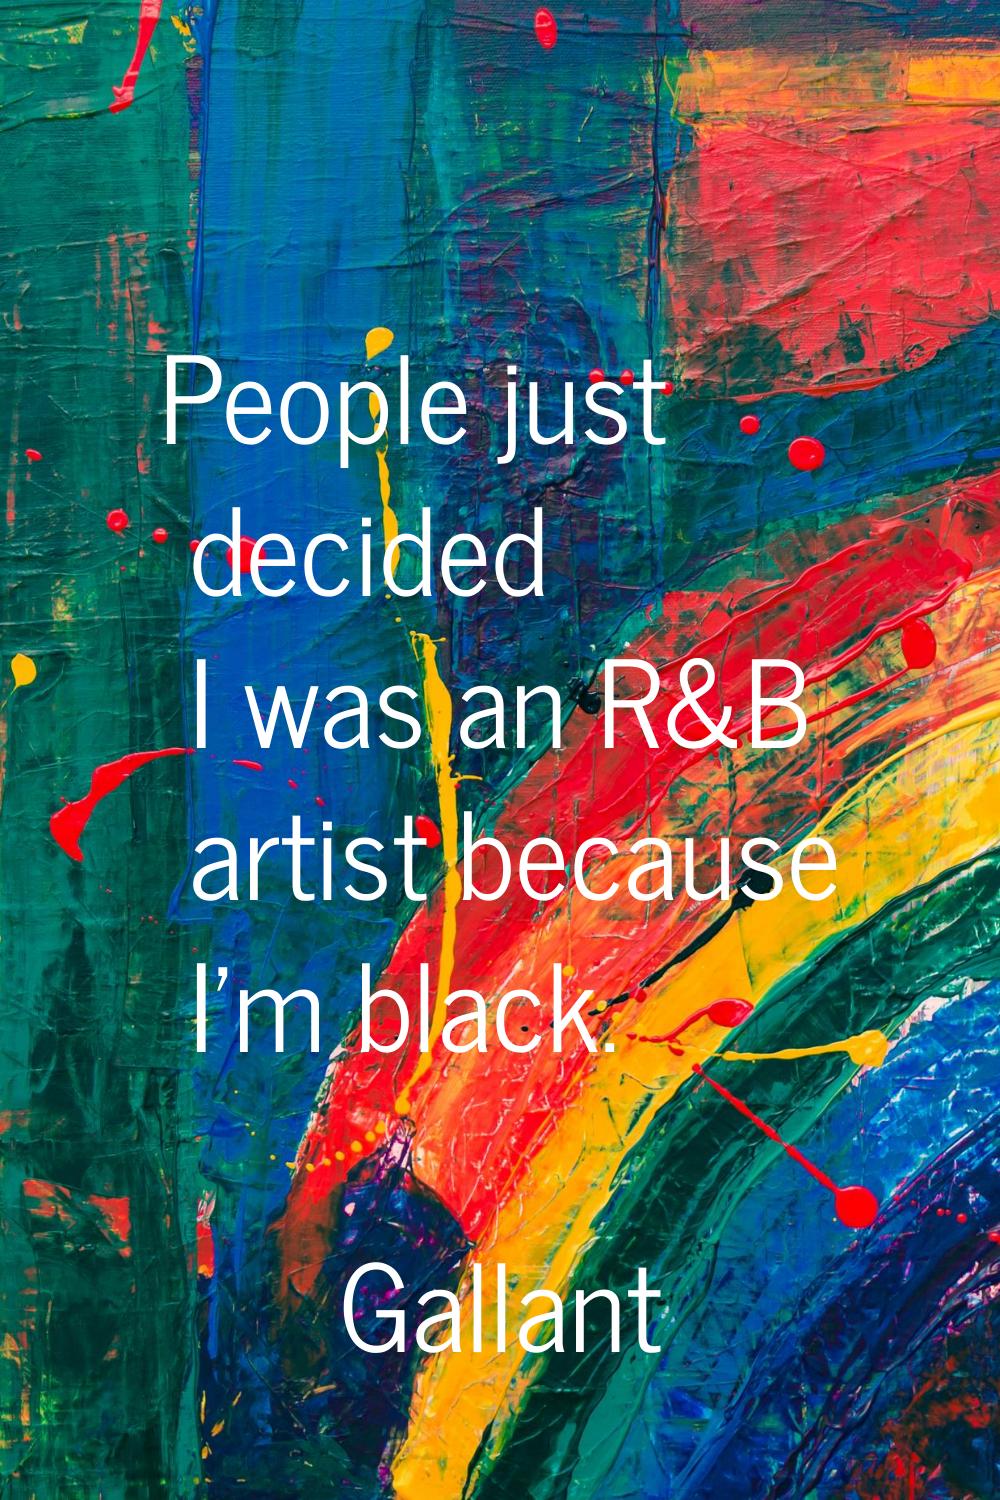 People just decided I was an R&B artist because I'm black.